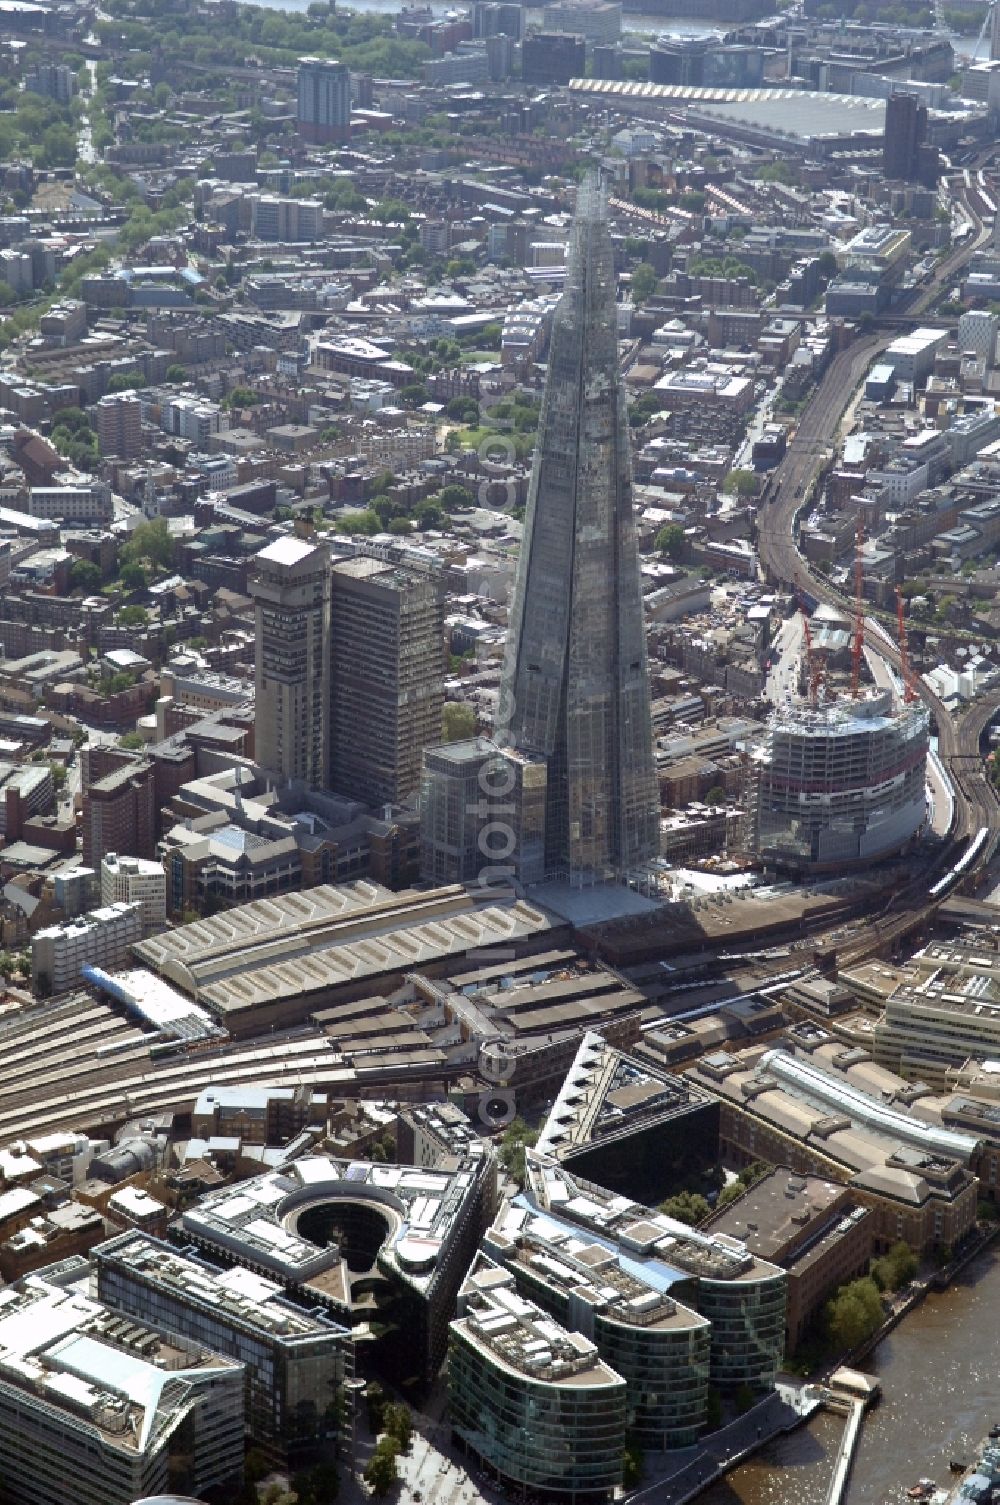 Aerial image London - View The Shard - Europe's tallest building. The high-rise occurs at the London Bridge Station. The Shard London Bridge (formerly known as London Bridge Tower, and Shard of Glass) is a skyscraper under construction in London, which will be on its completion as it stood at 310 meters, the second tallest building in Europe